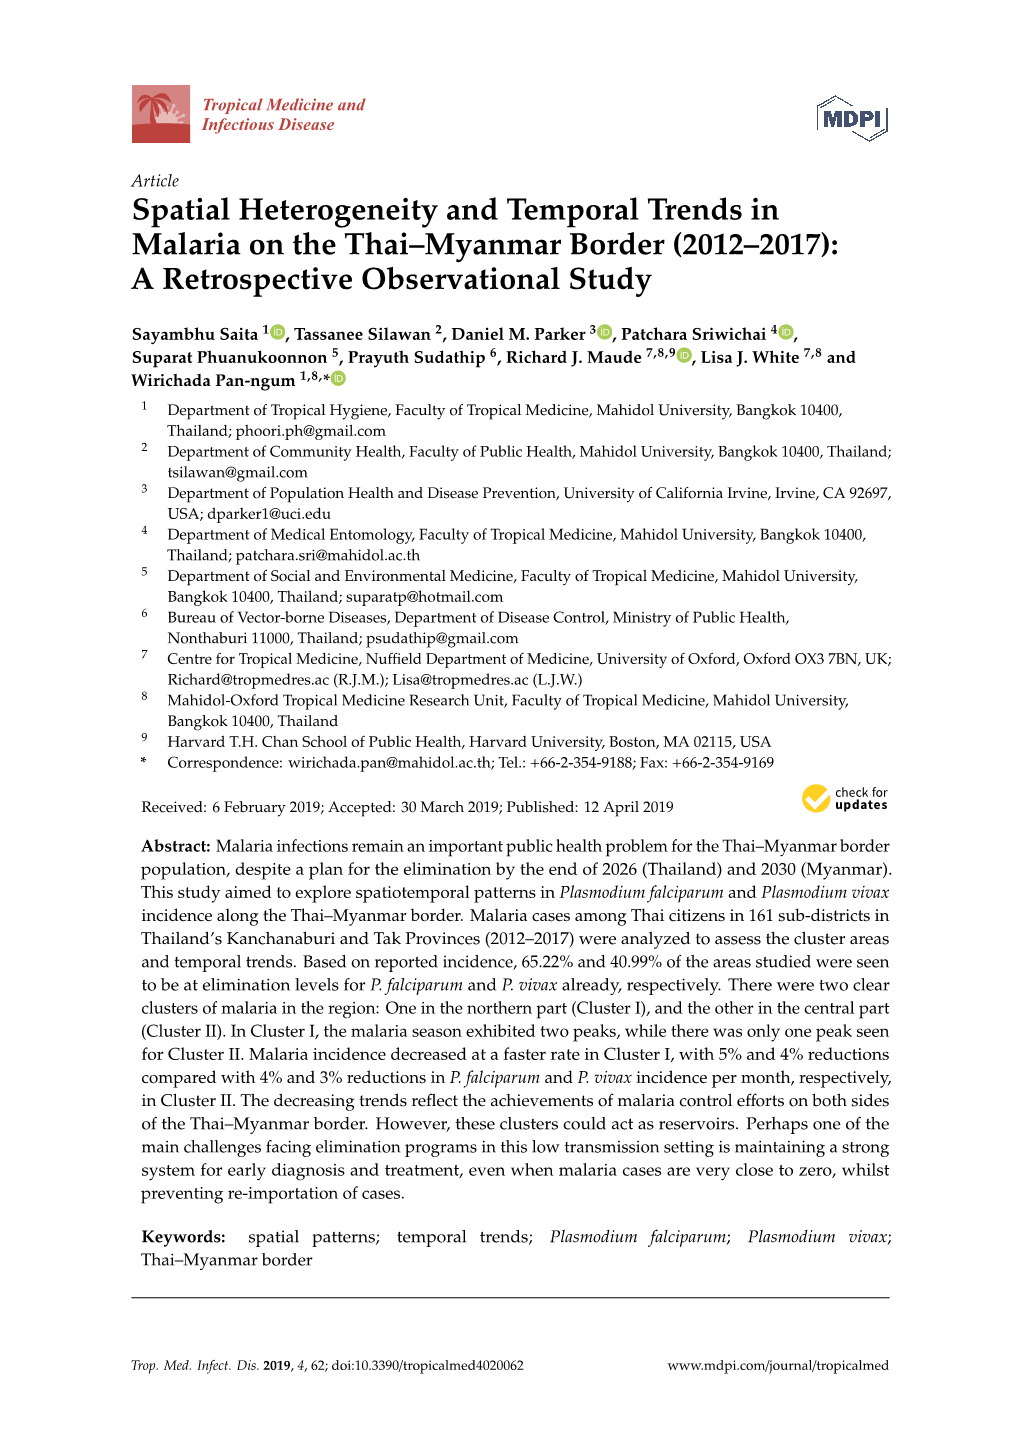 Spatial Heterogeneity and Temporal Trends in Malaria on the Thai–Myanmar Border (2012–2017): a Retrospective Observational Study